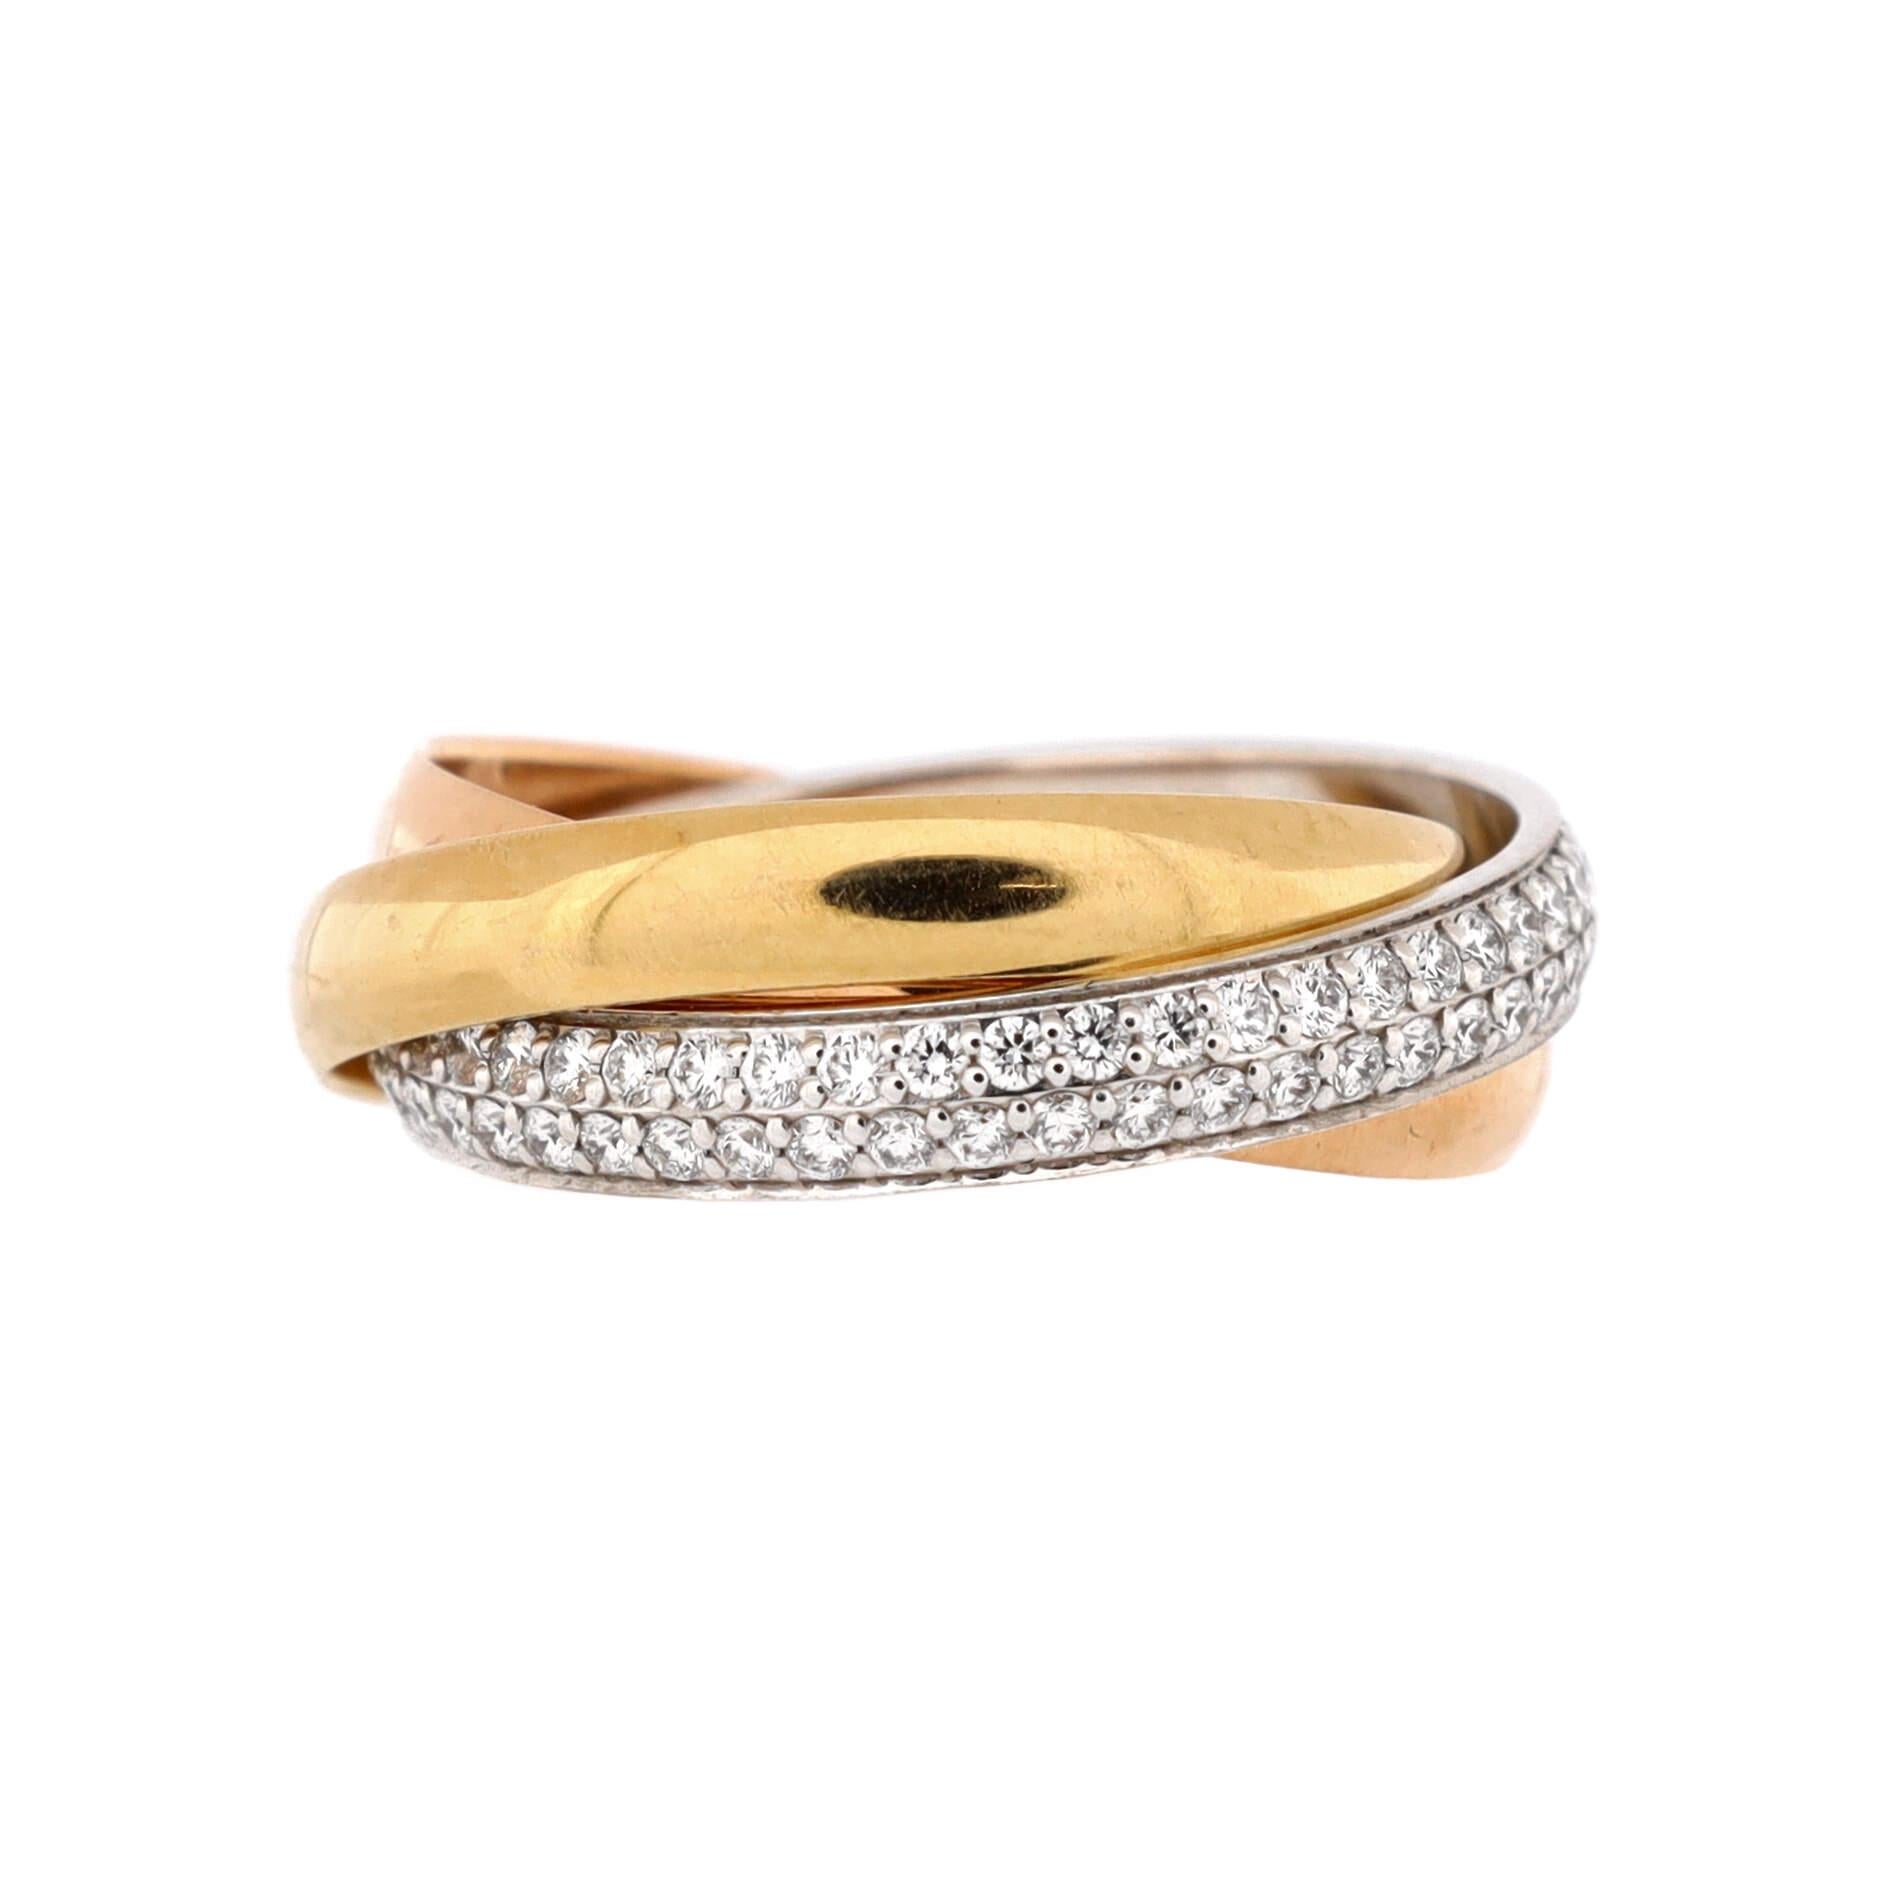 Condition: Very good. Moderate wear throughout.
Accessories: No Accessories
Measurements: Size: 4.5 - 48, Width: 2.90 mm
Designer: Cartier
Model: Trinity Ring 18K Tricolor Gold with Pave Diamonds Small
Exterior Color: Tricolor Gold
Item Number: